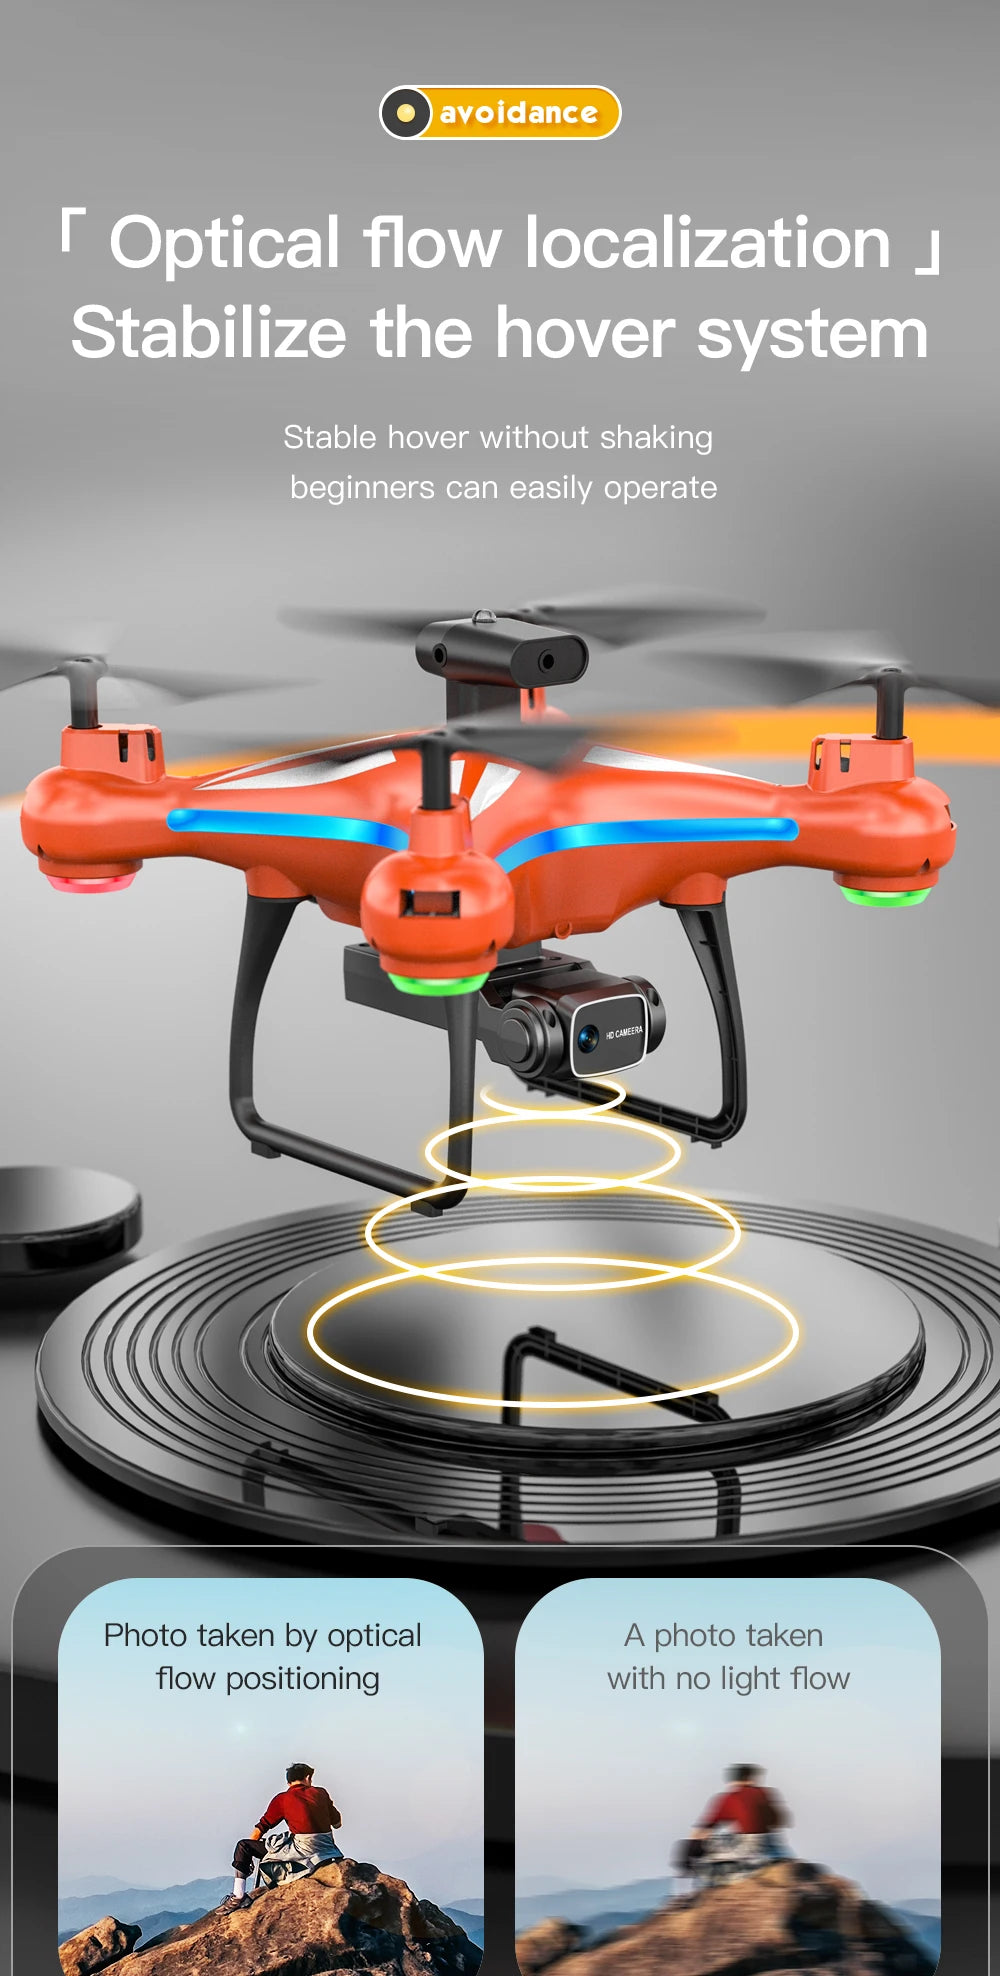 AE11 Drone, optical flow localization stabilize the hover system stable hover without shaking beginners can